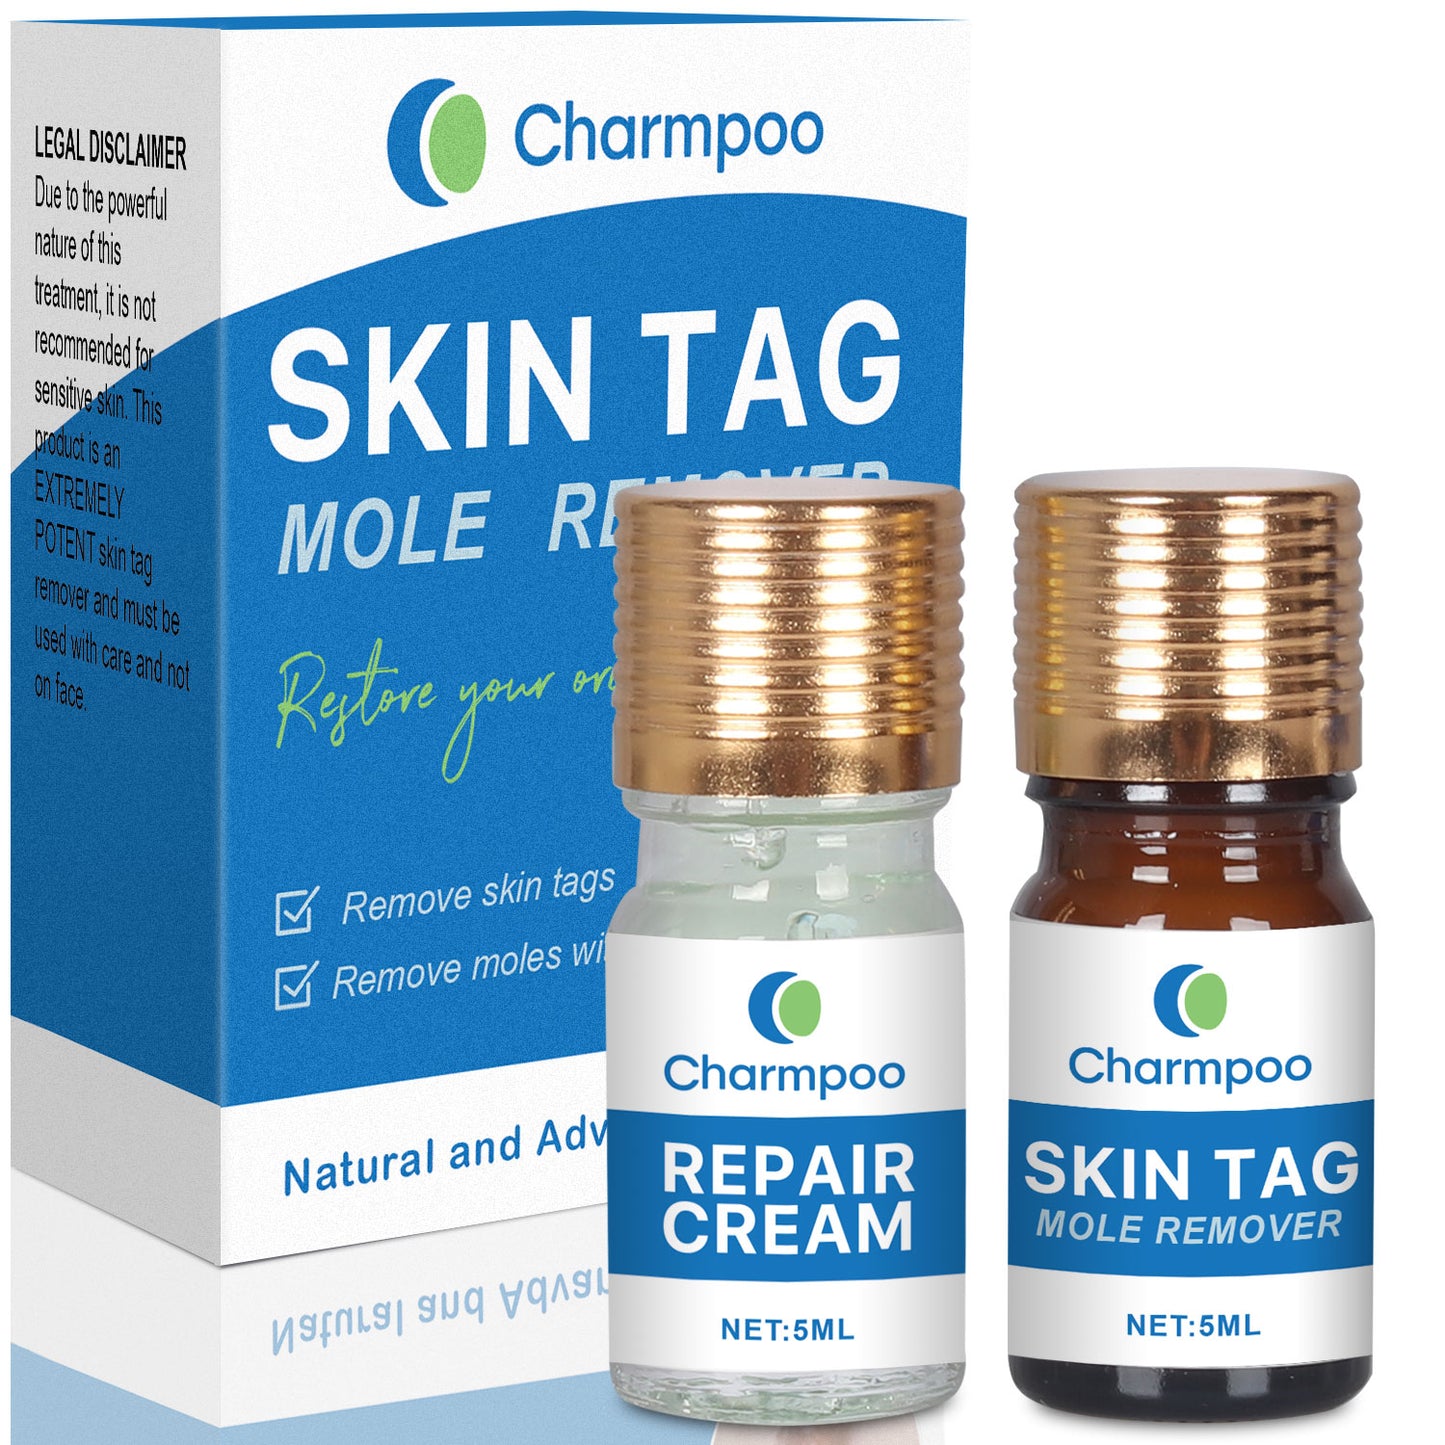 Charmpoo Skin Tag Removal - All Natural Mole and Skin Tag Remover and Repair Lotion- Large Skin Tag Remover - Plant-Based Formula - Easy to Use Skin Tag Remover Set - Safe Mole and Tag Remover